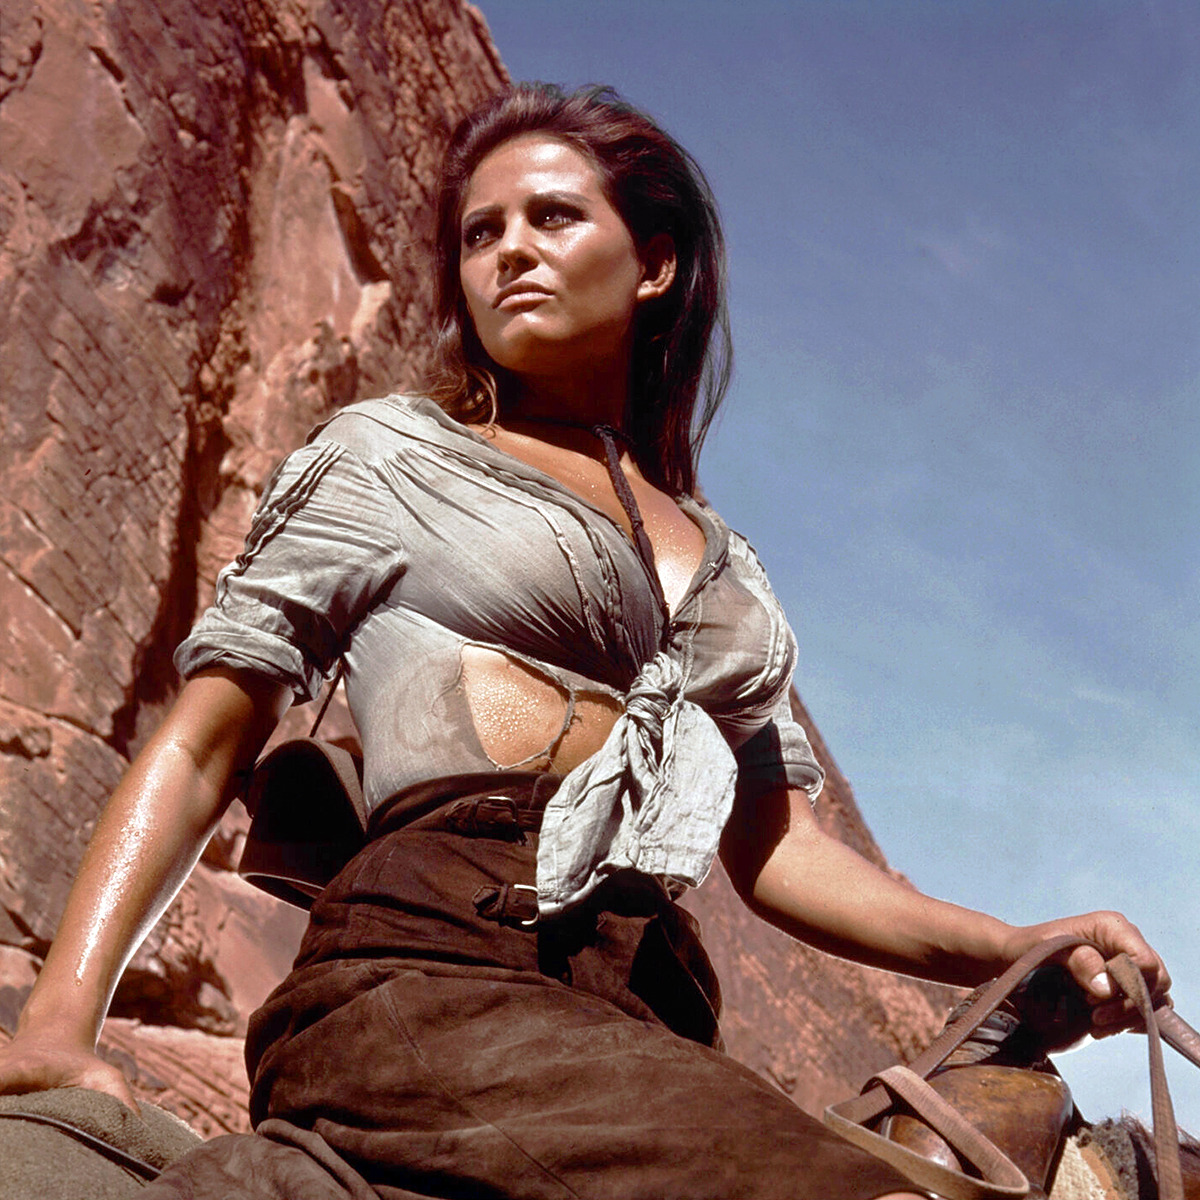 20th-century-man:
“Claudia Cardinale / production still from Richard Brooks’s The Professionals (1966)
”